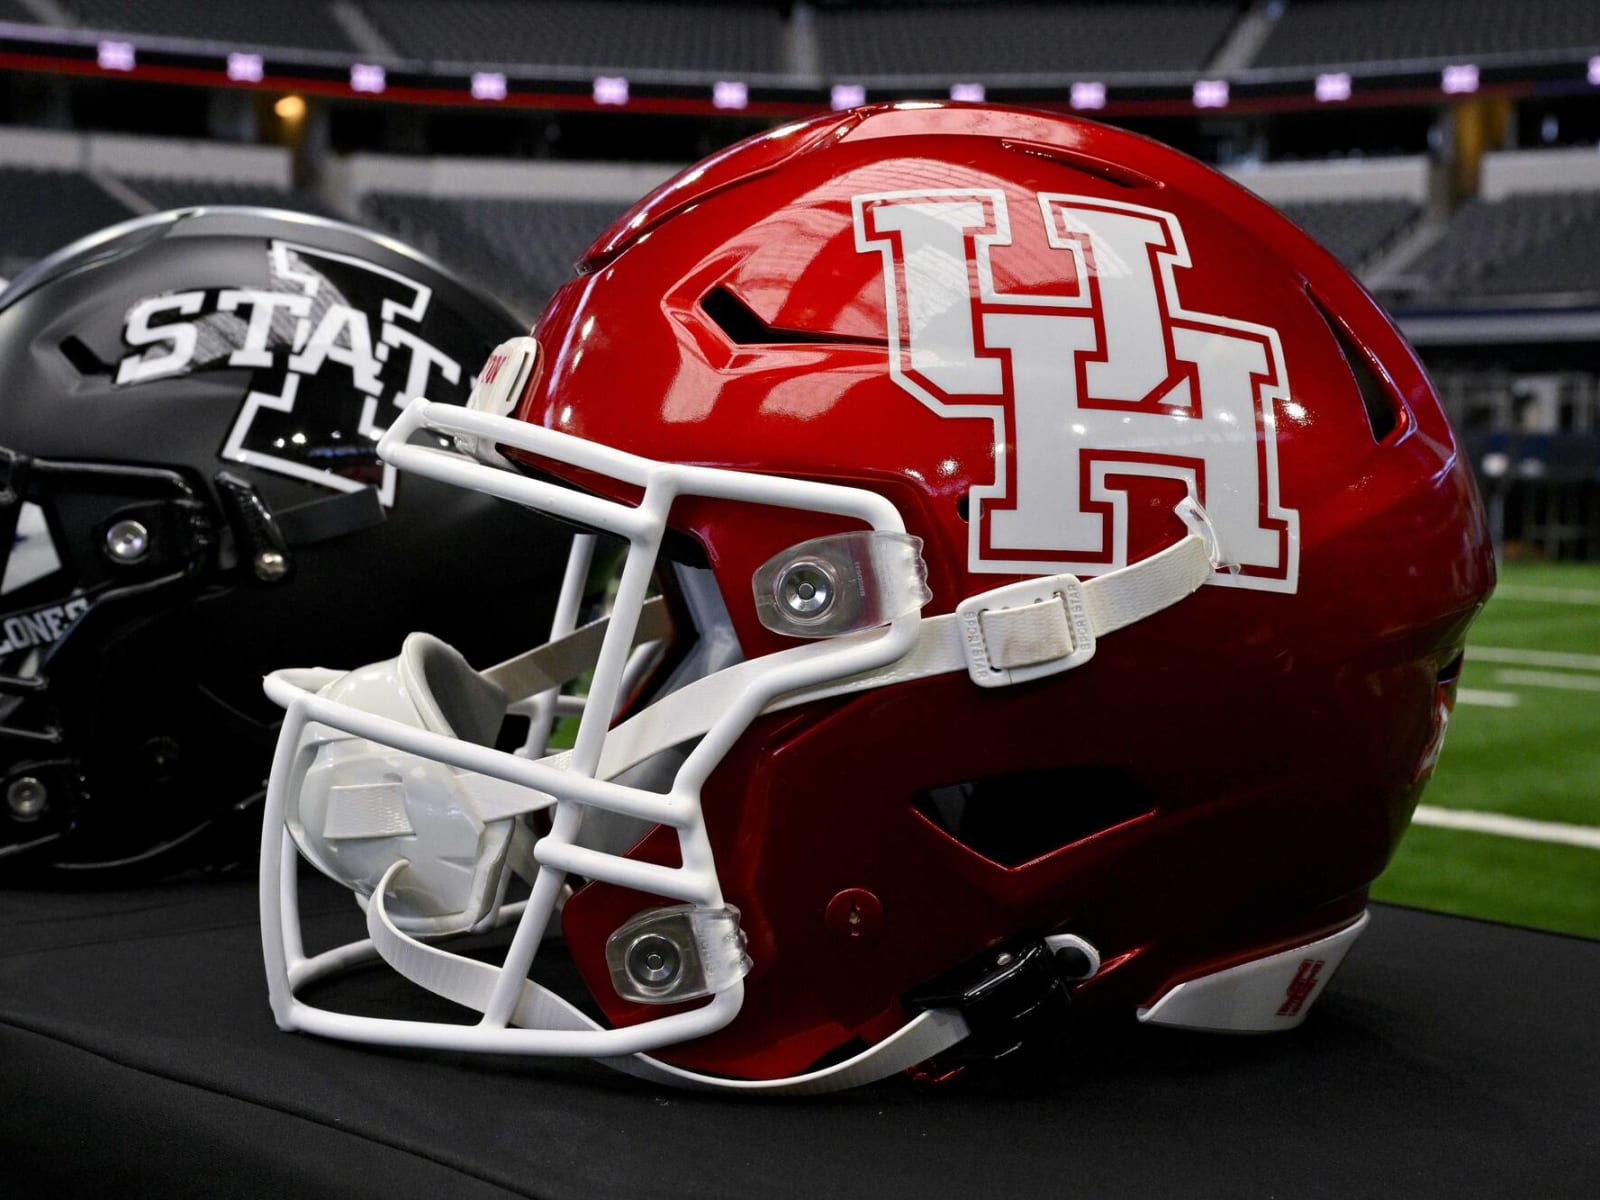 University of Houston to wear Oilers-like uniforms for Saturday's